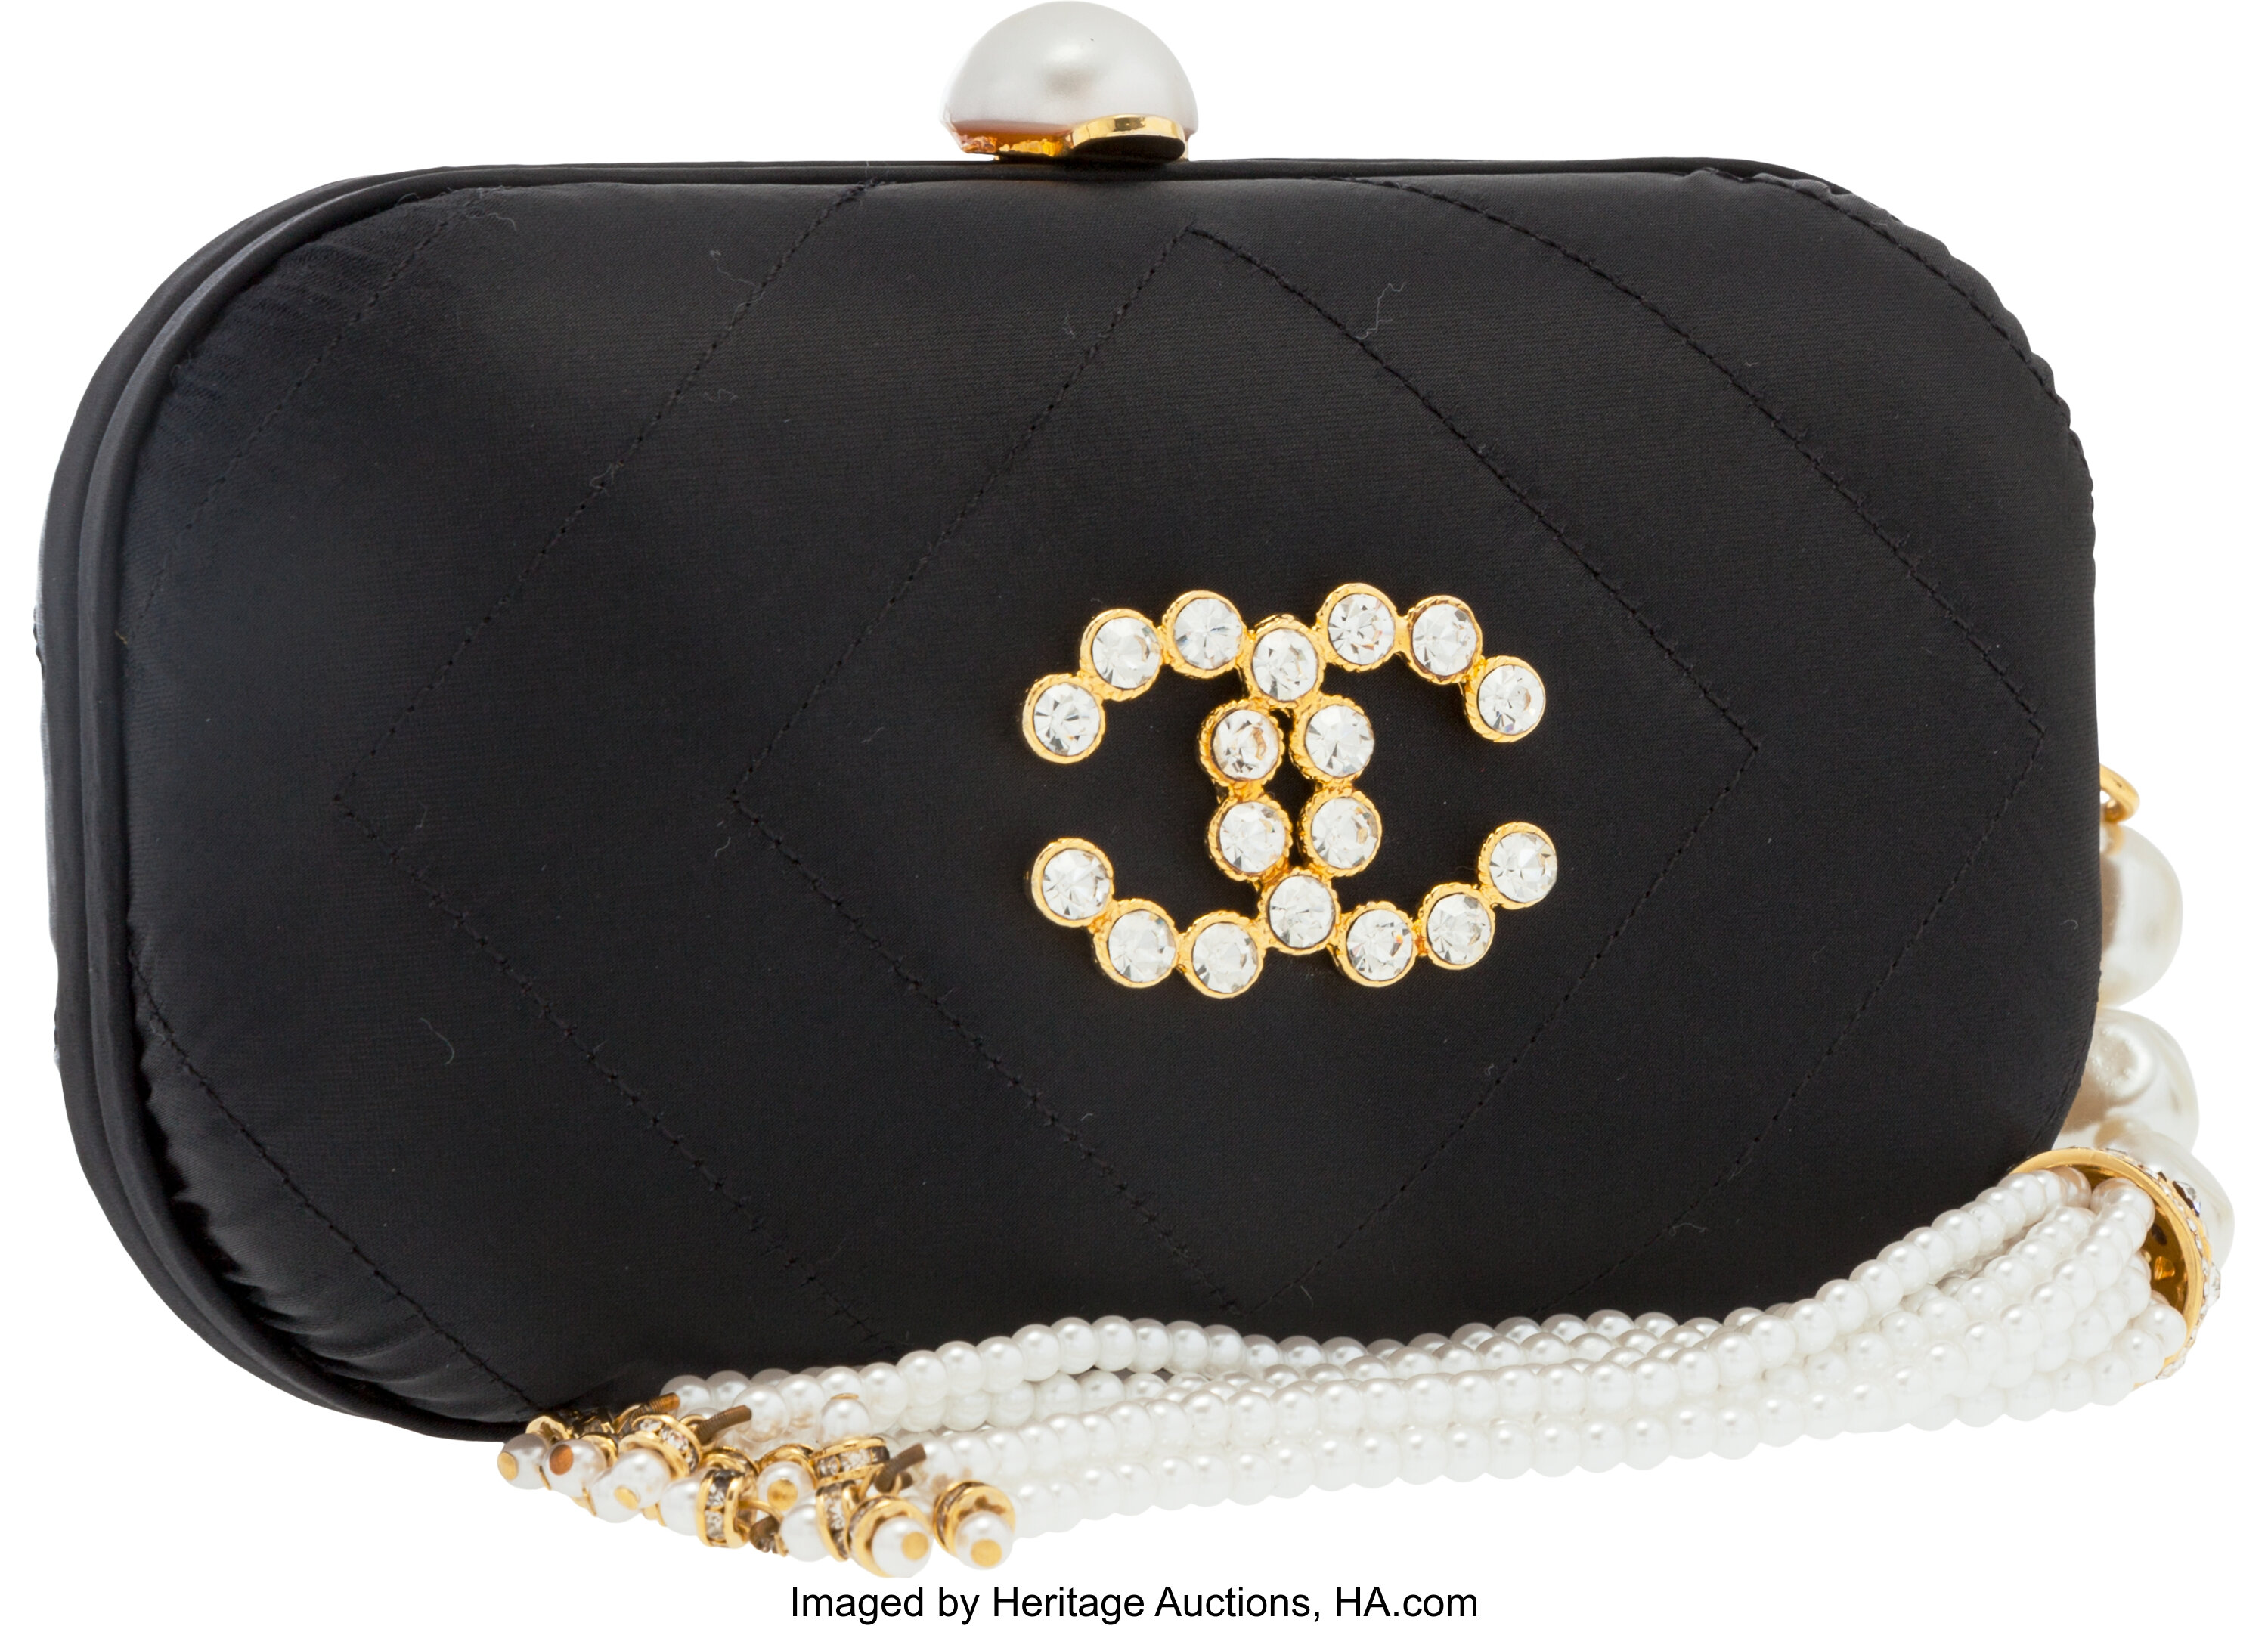 Chanel Black Satin Clutch Bag with Pearl Tassel . Very Good to